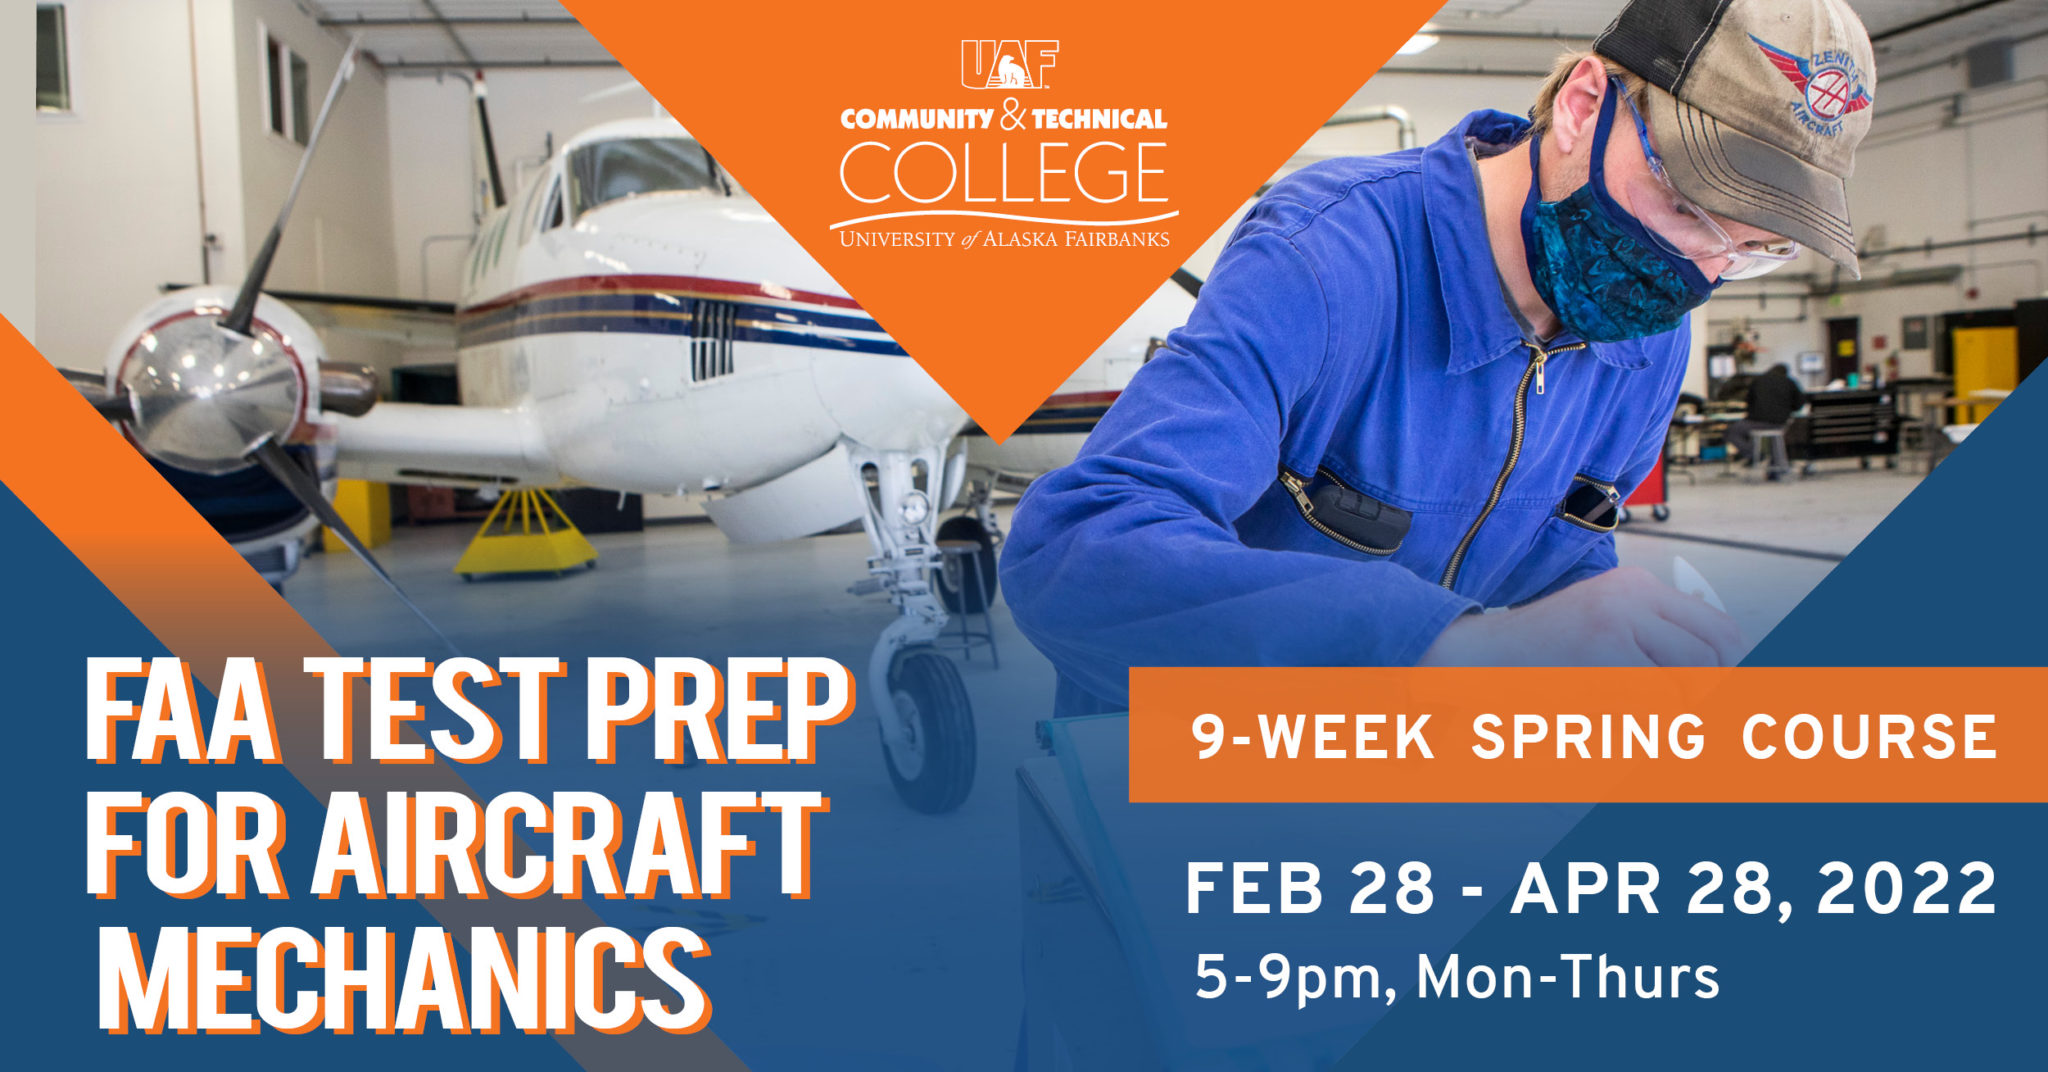 CTC to offer FAA Test Prep Spring course for military and civilian